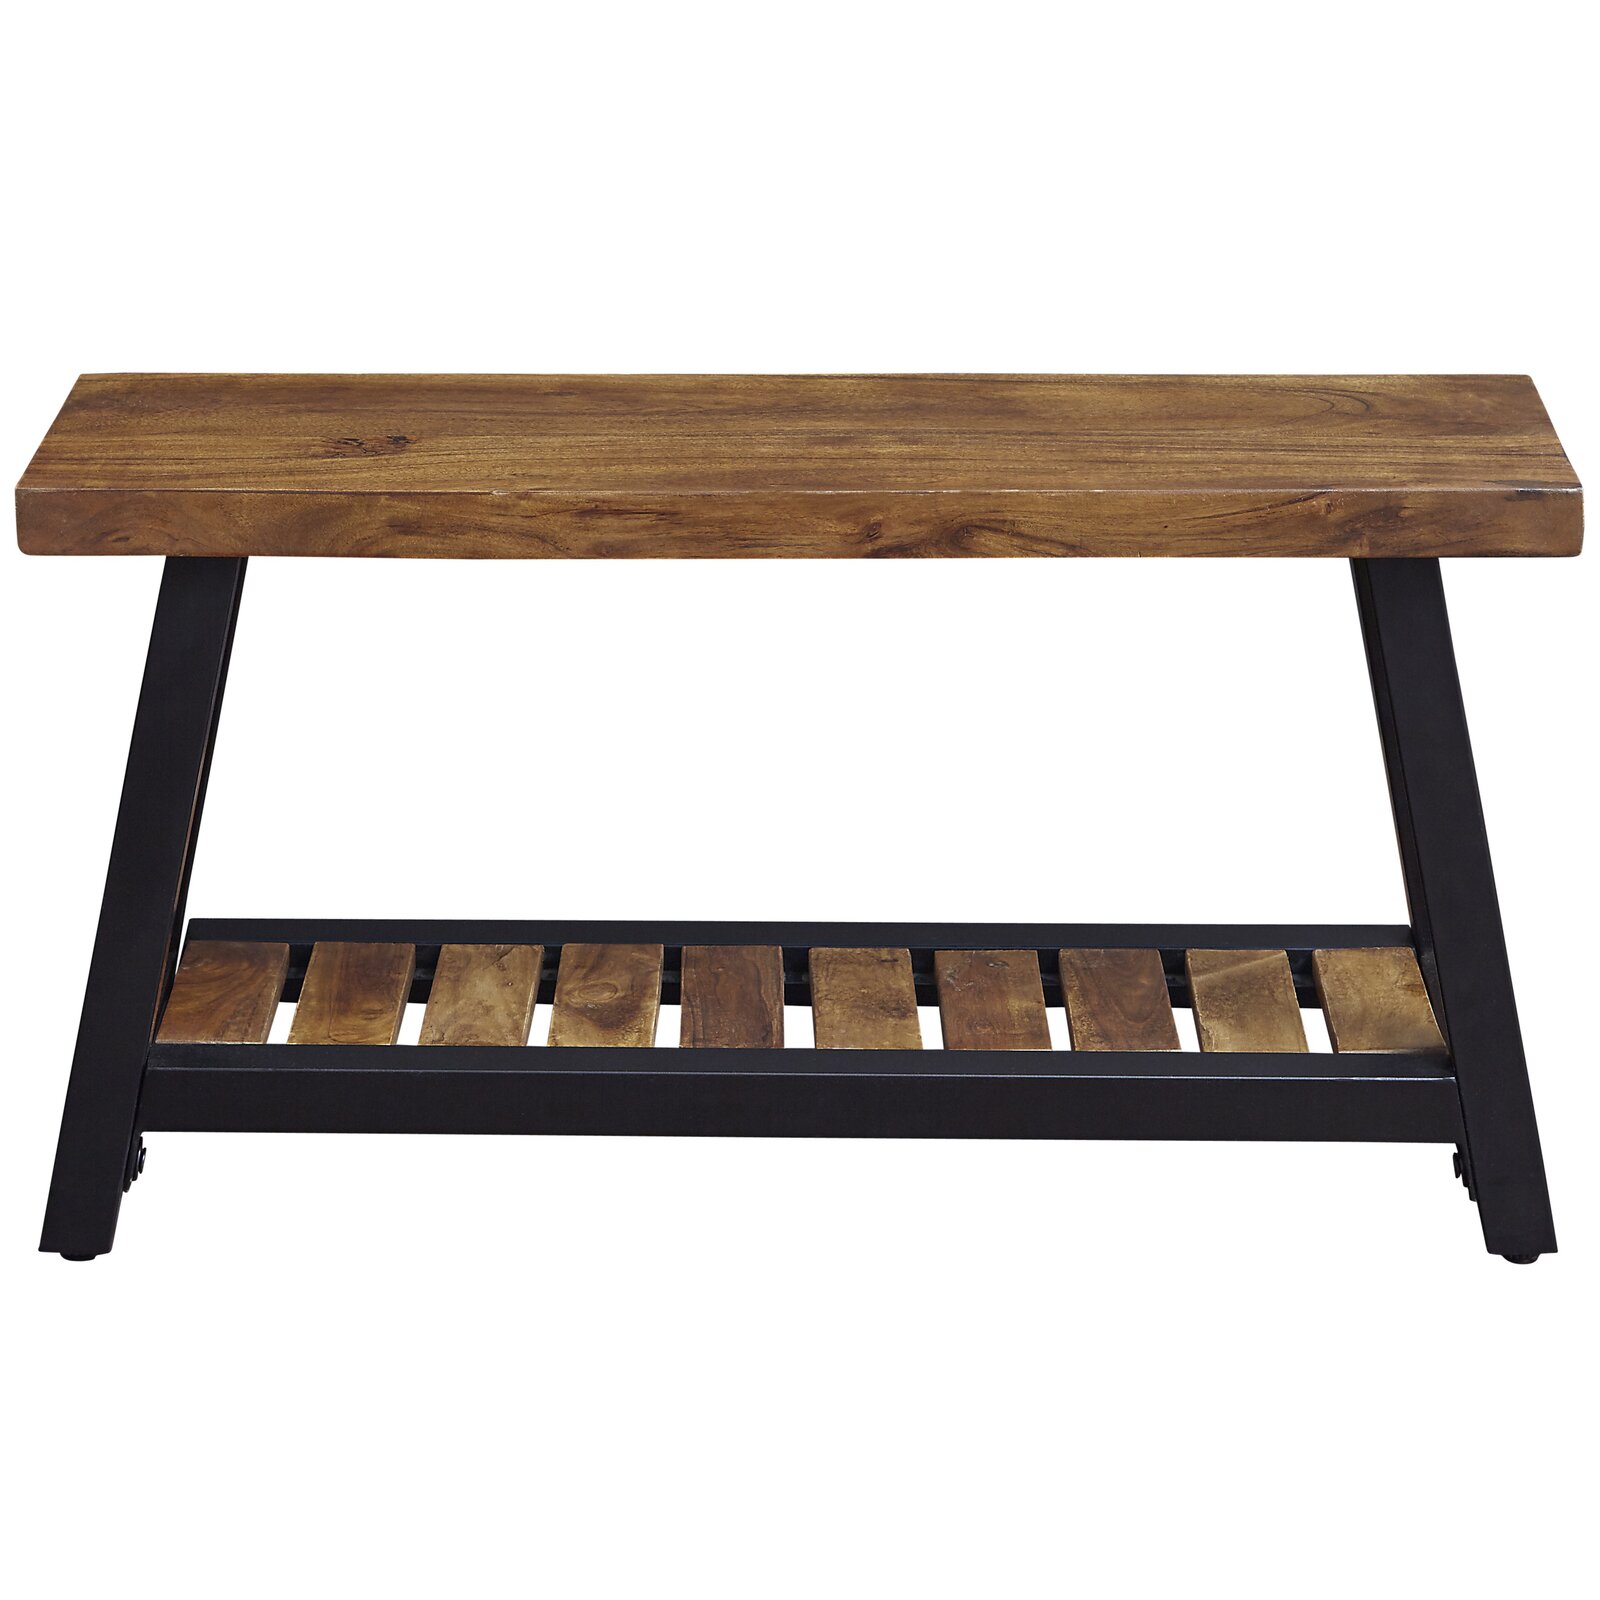 Foundstone Lisette Solid Wood Shelves Storage Bench & Reviews